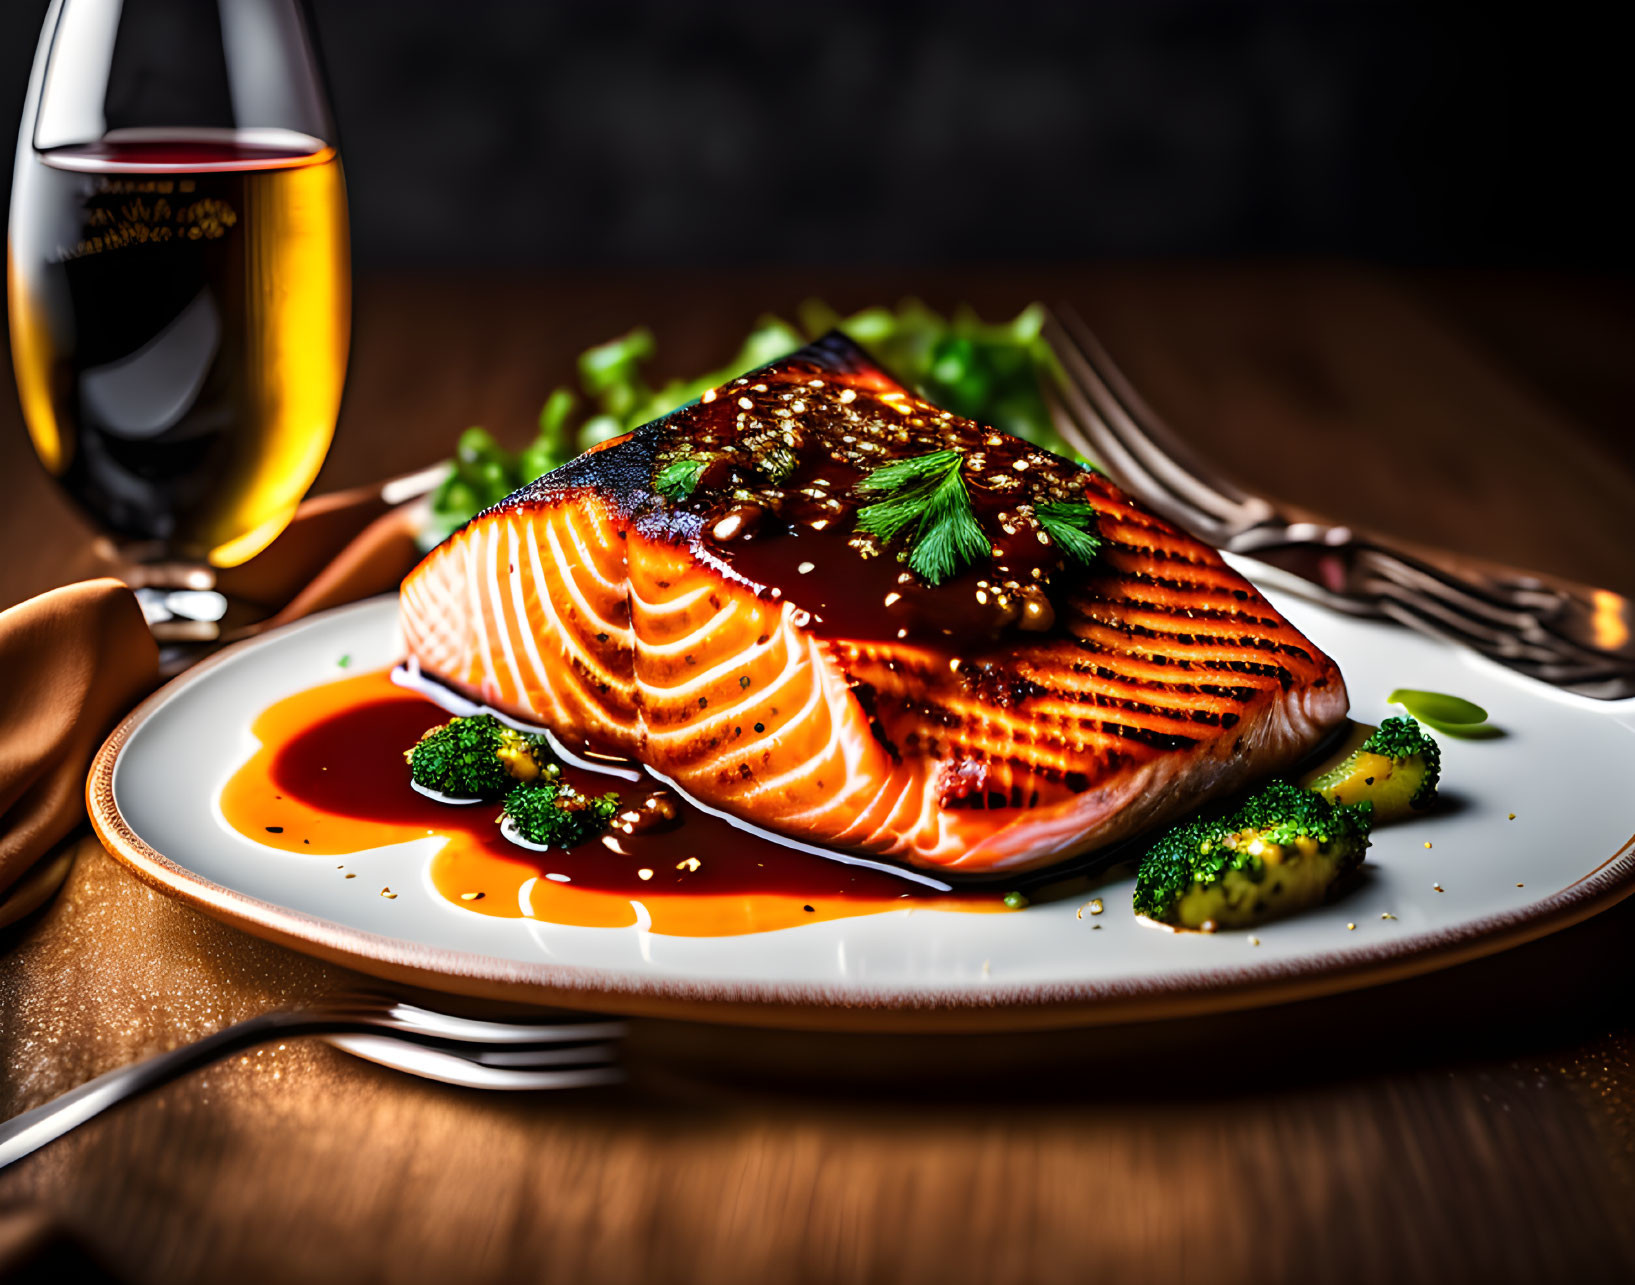 Freshly Grilled Salmon Fillet with Broccoli and White Wine Sauce Presentation